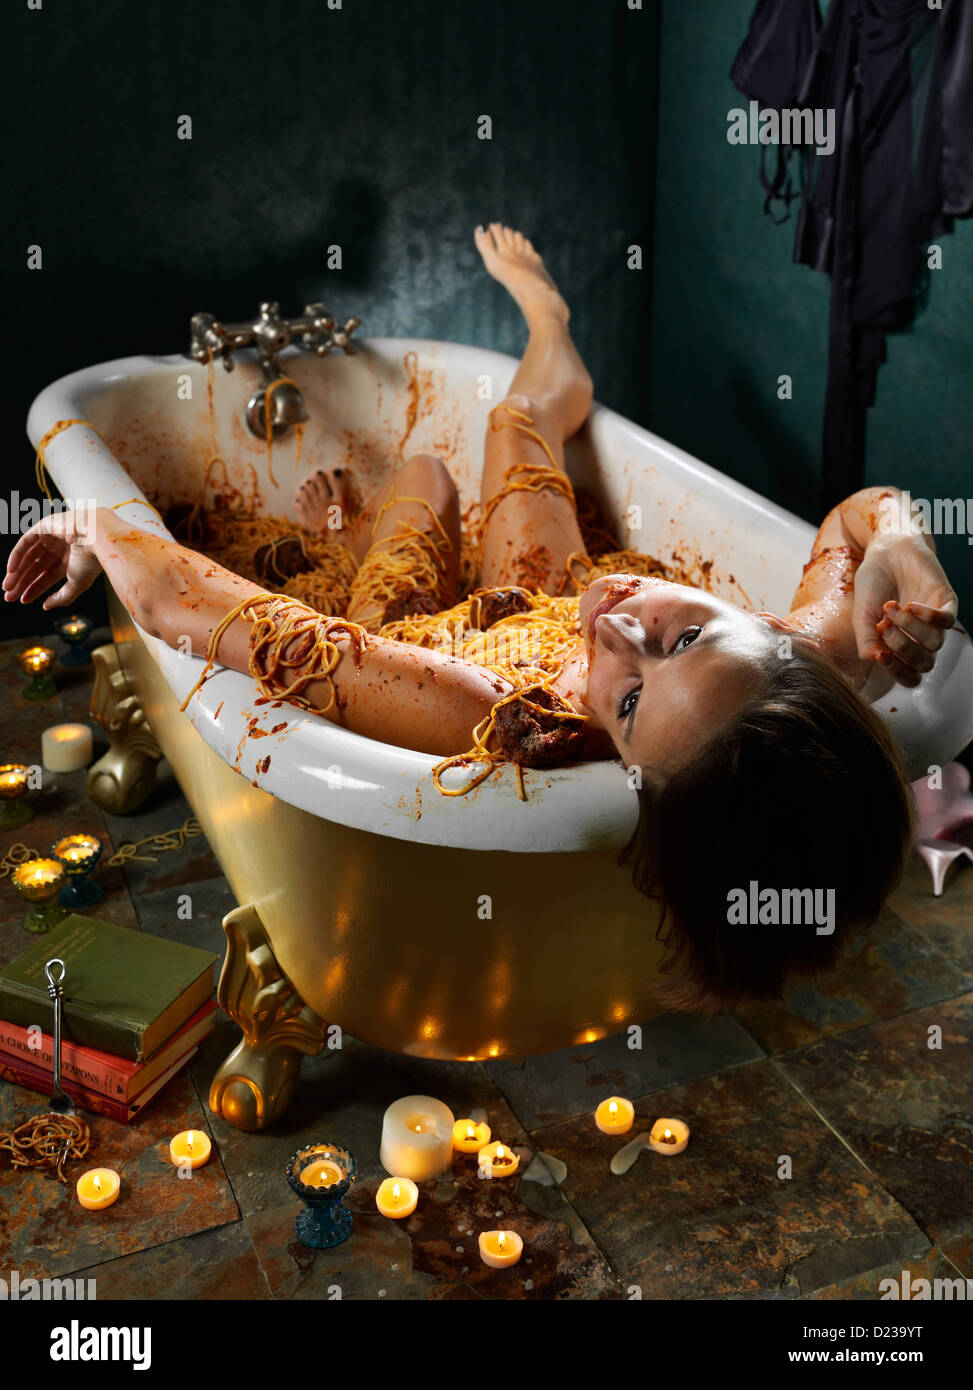 Food Crime scene with death by gluttony. Stock Photo